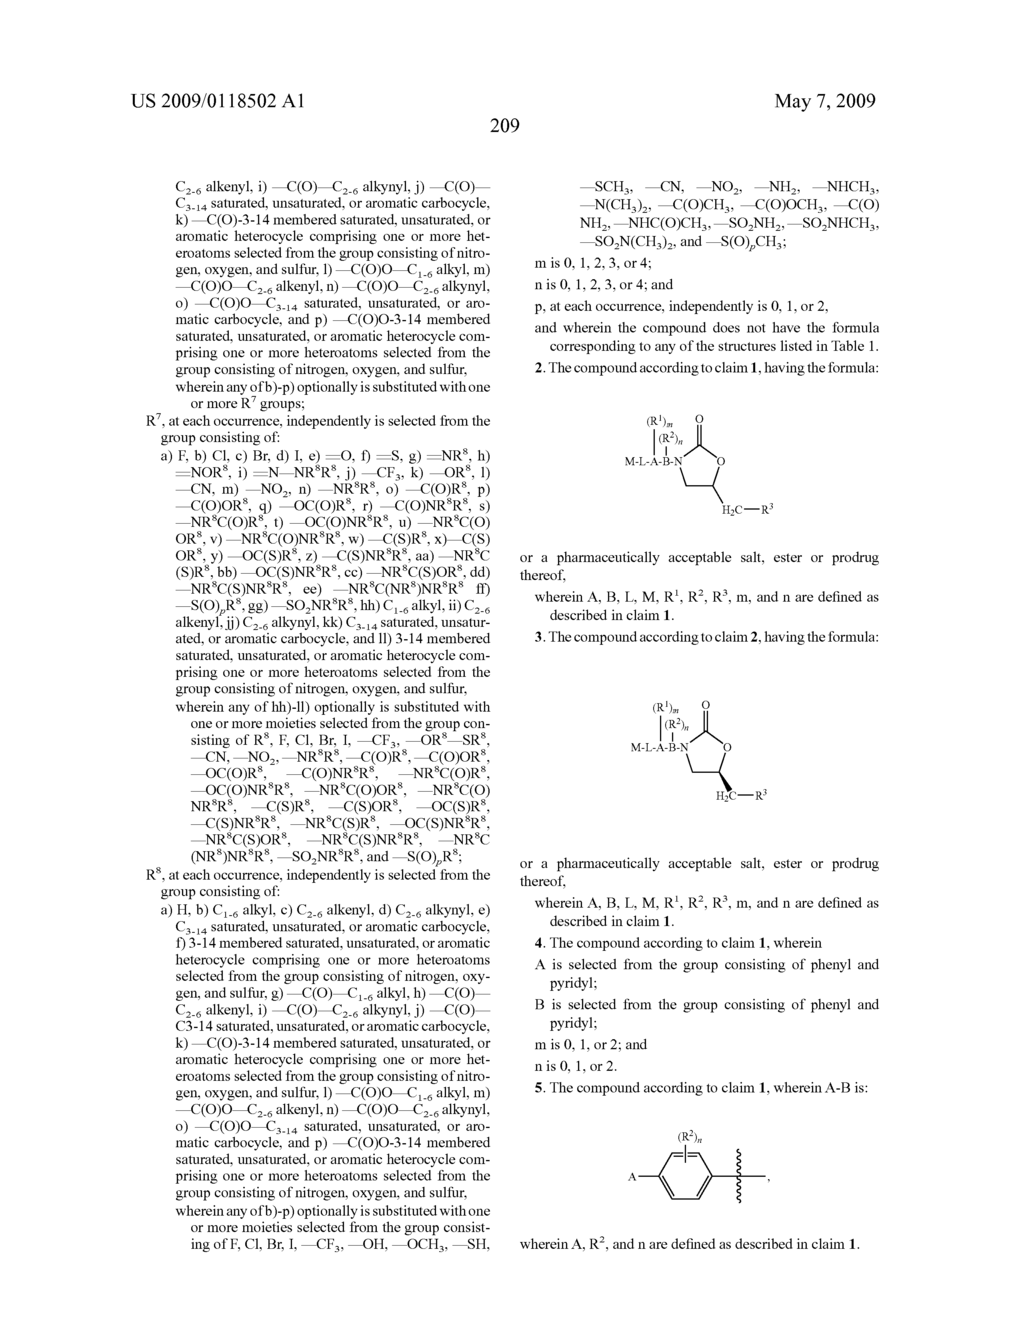 BIARYL HETEROCYCLIC COMPOUNDS AND METHODS OF MAKING AND USING THE SAME - diagram, schematic, and image 210